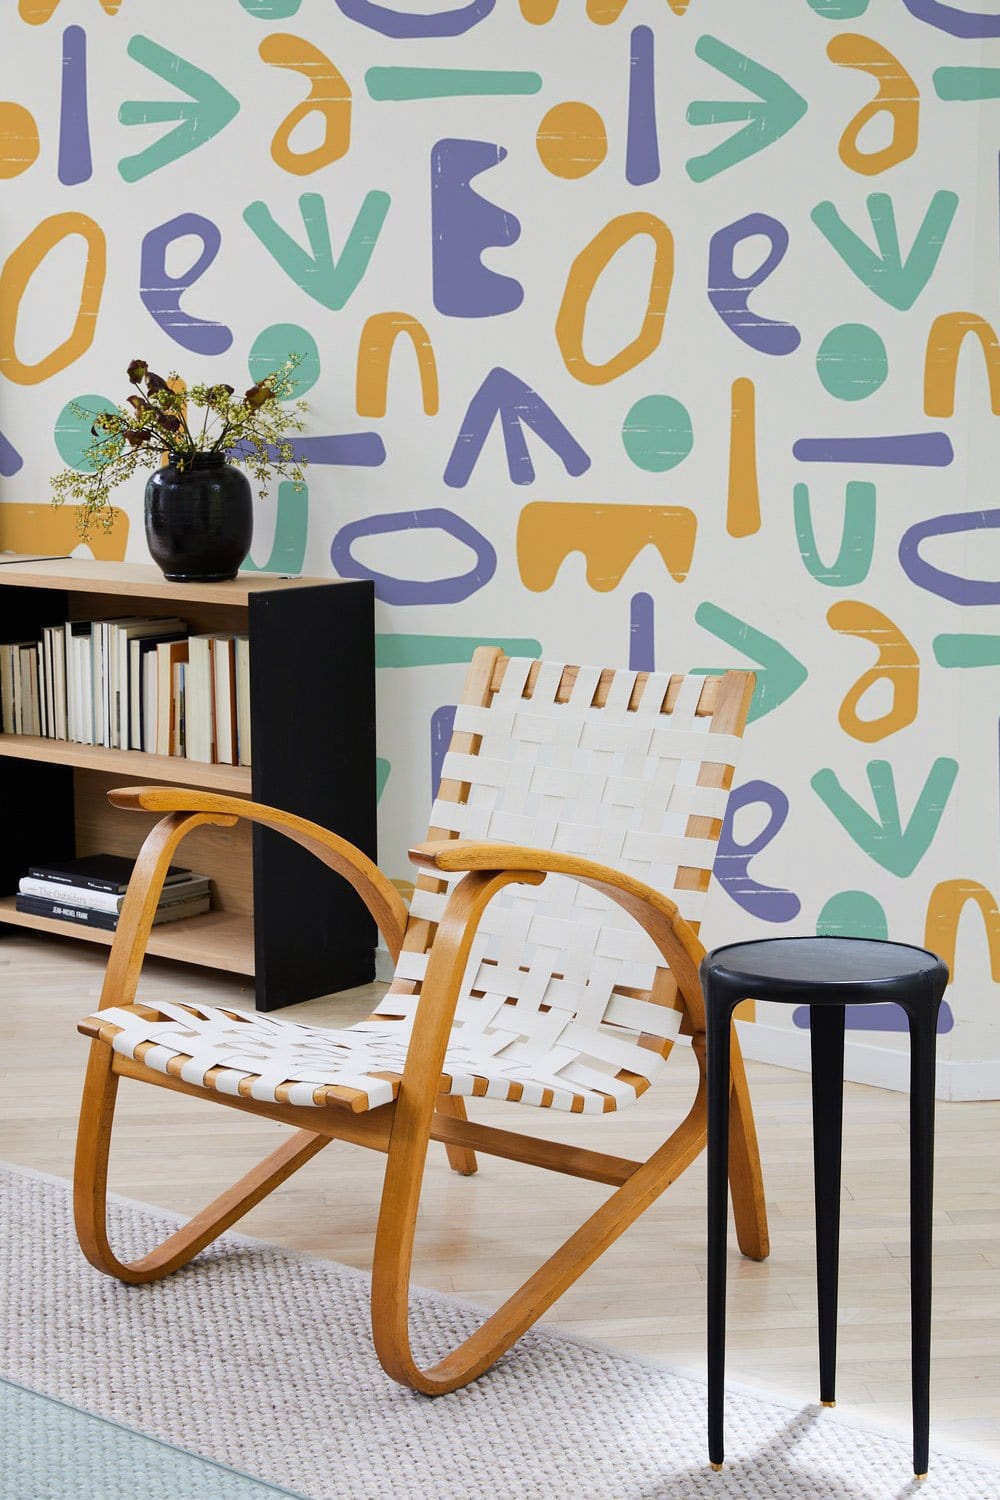 Mural wallpaper design featuring colourful letters, perfect for decorating the living room.